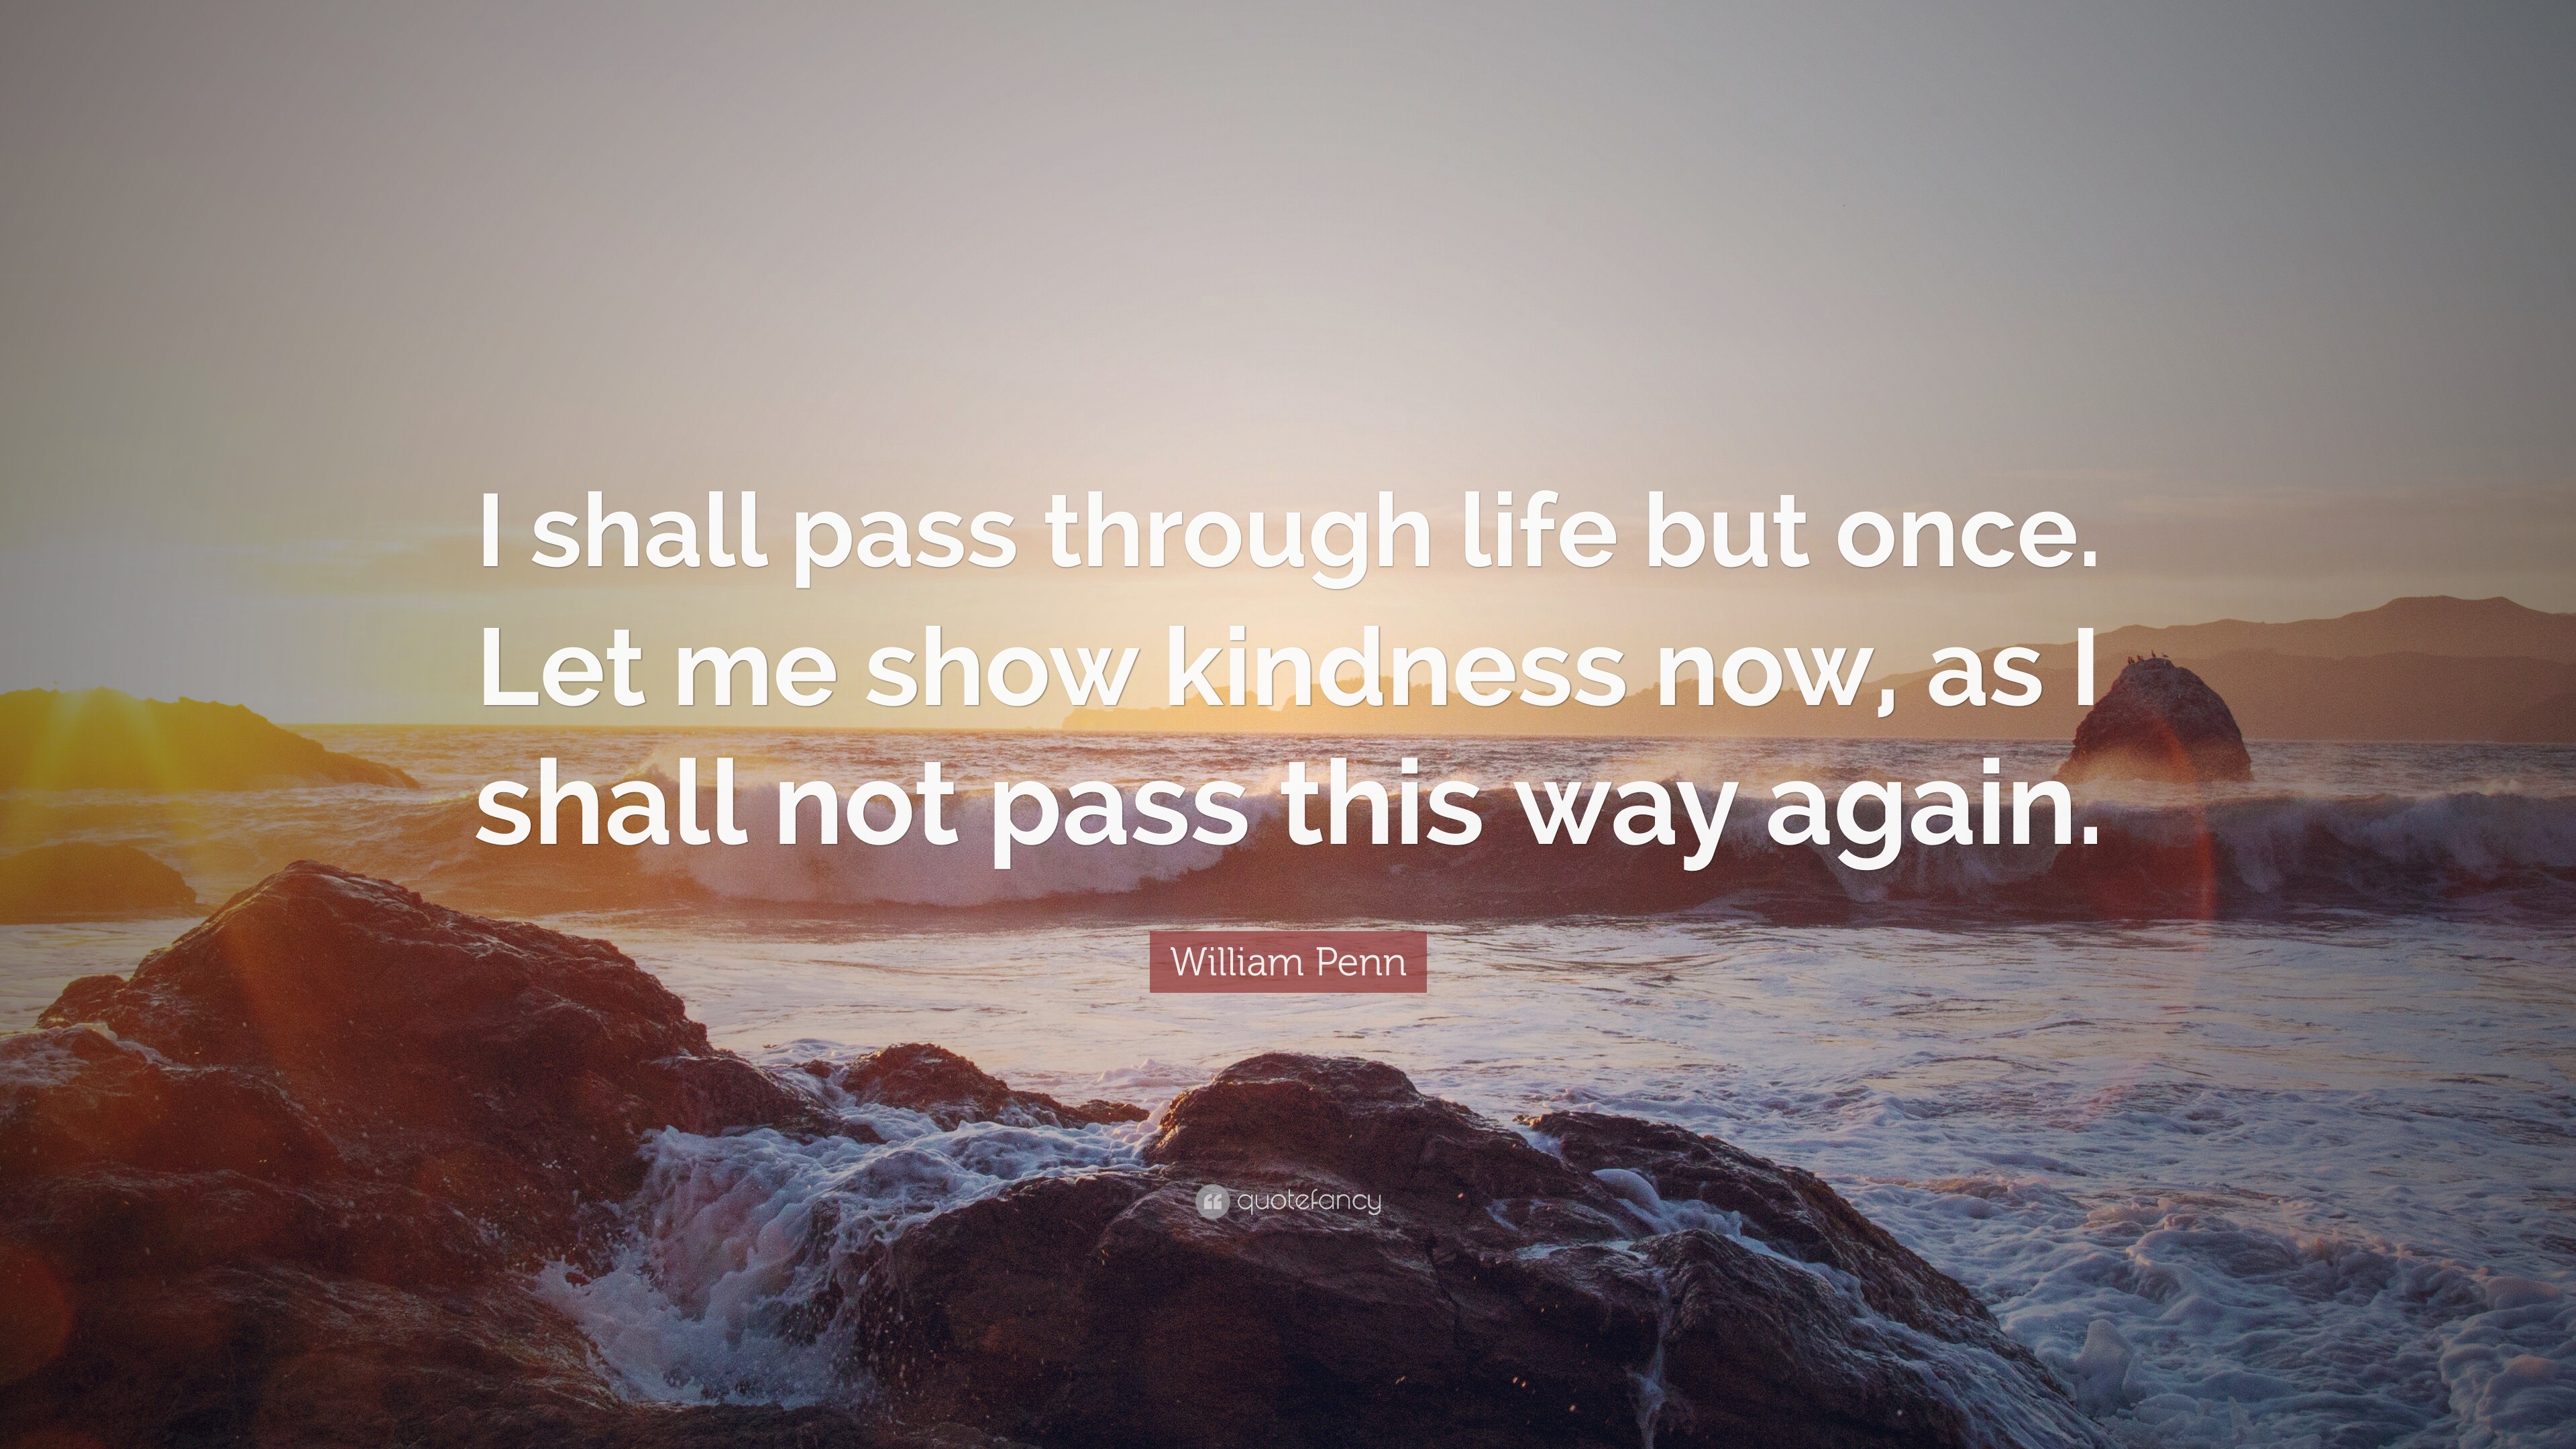 William Penn Quote: “I shall pass through life but once. Let me show ...